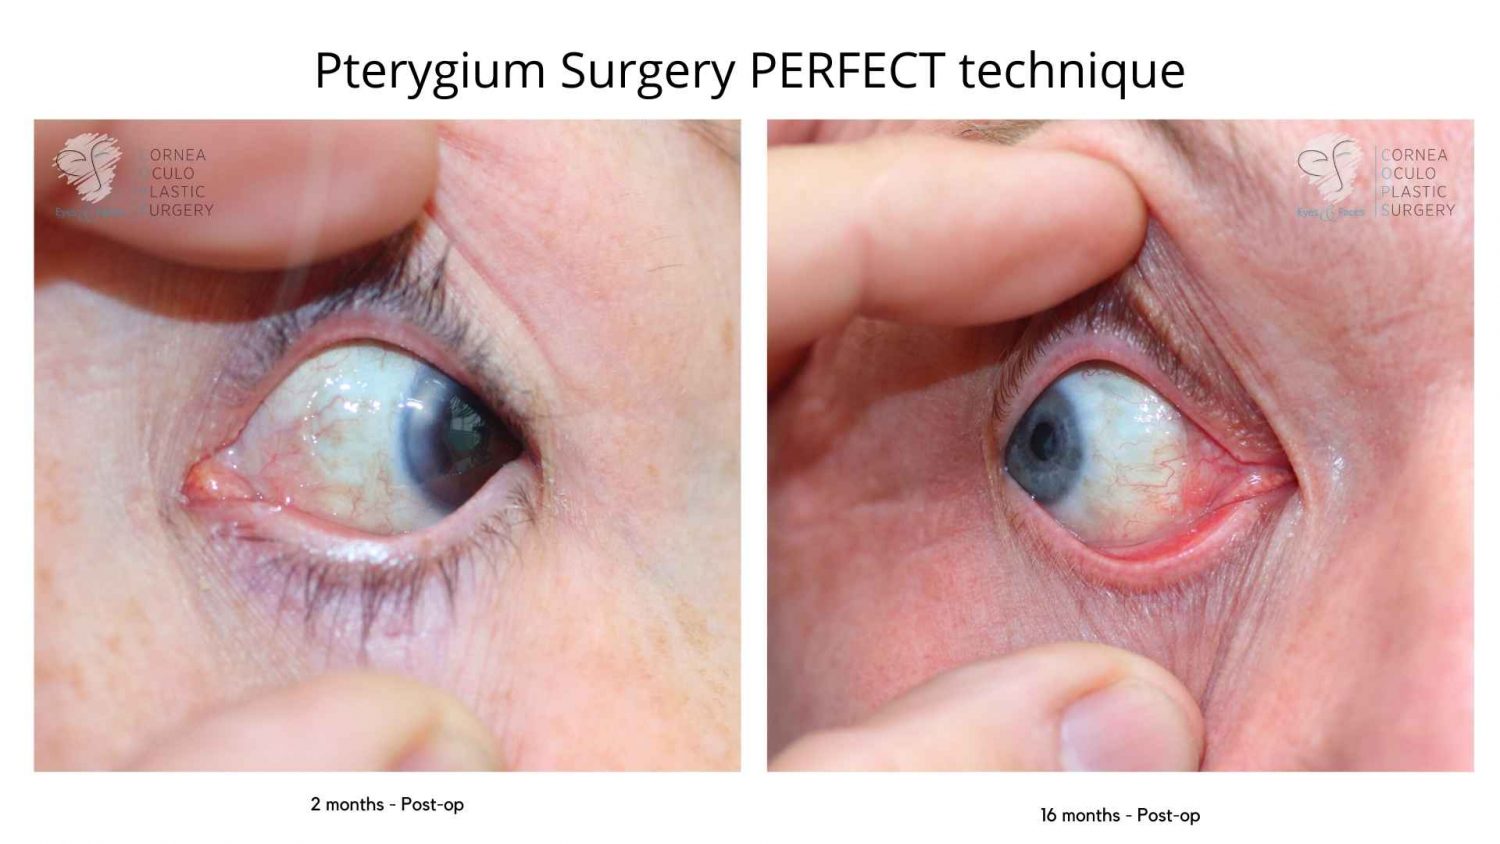 PERFECT pterygium surgery, this technique is used for optimal results post operatively. This shows results at 2 months and 16 months post PERFECT pterygium surgery.